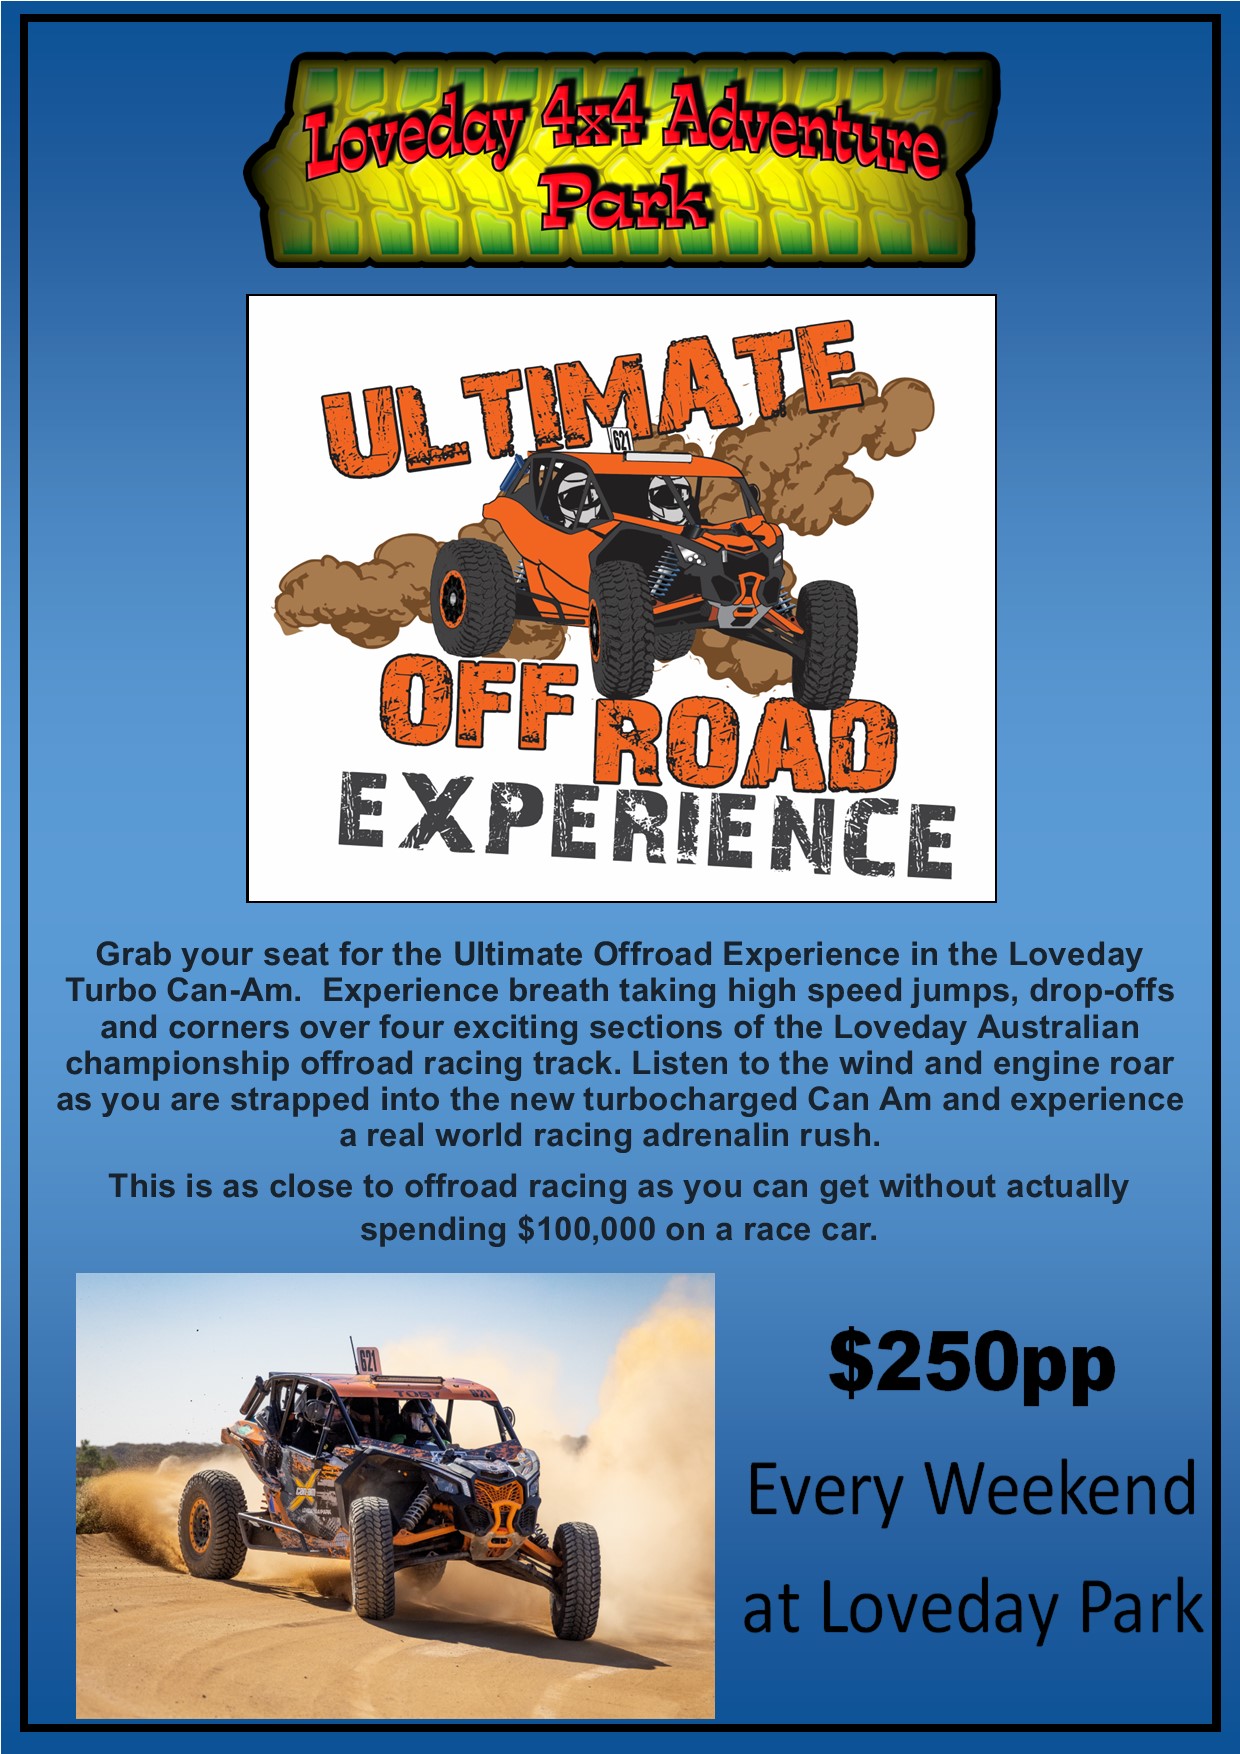 The ultimate Off road experience